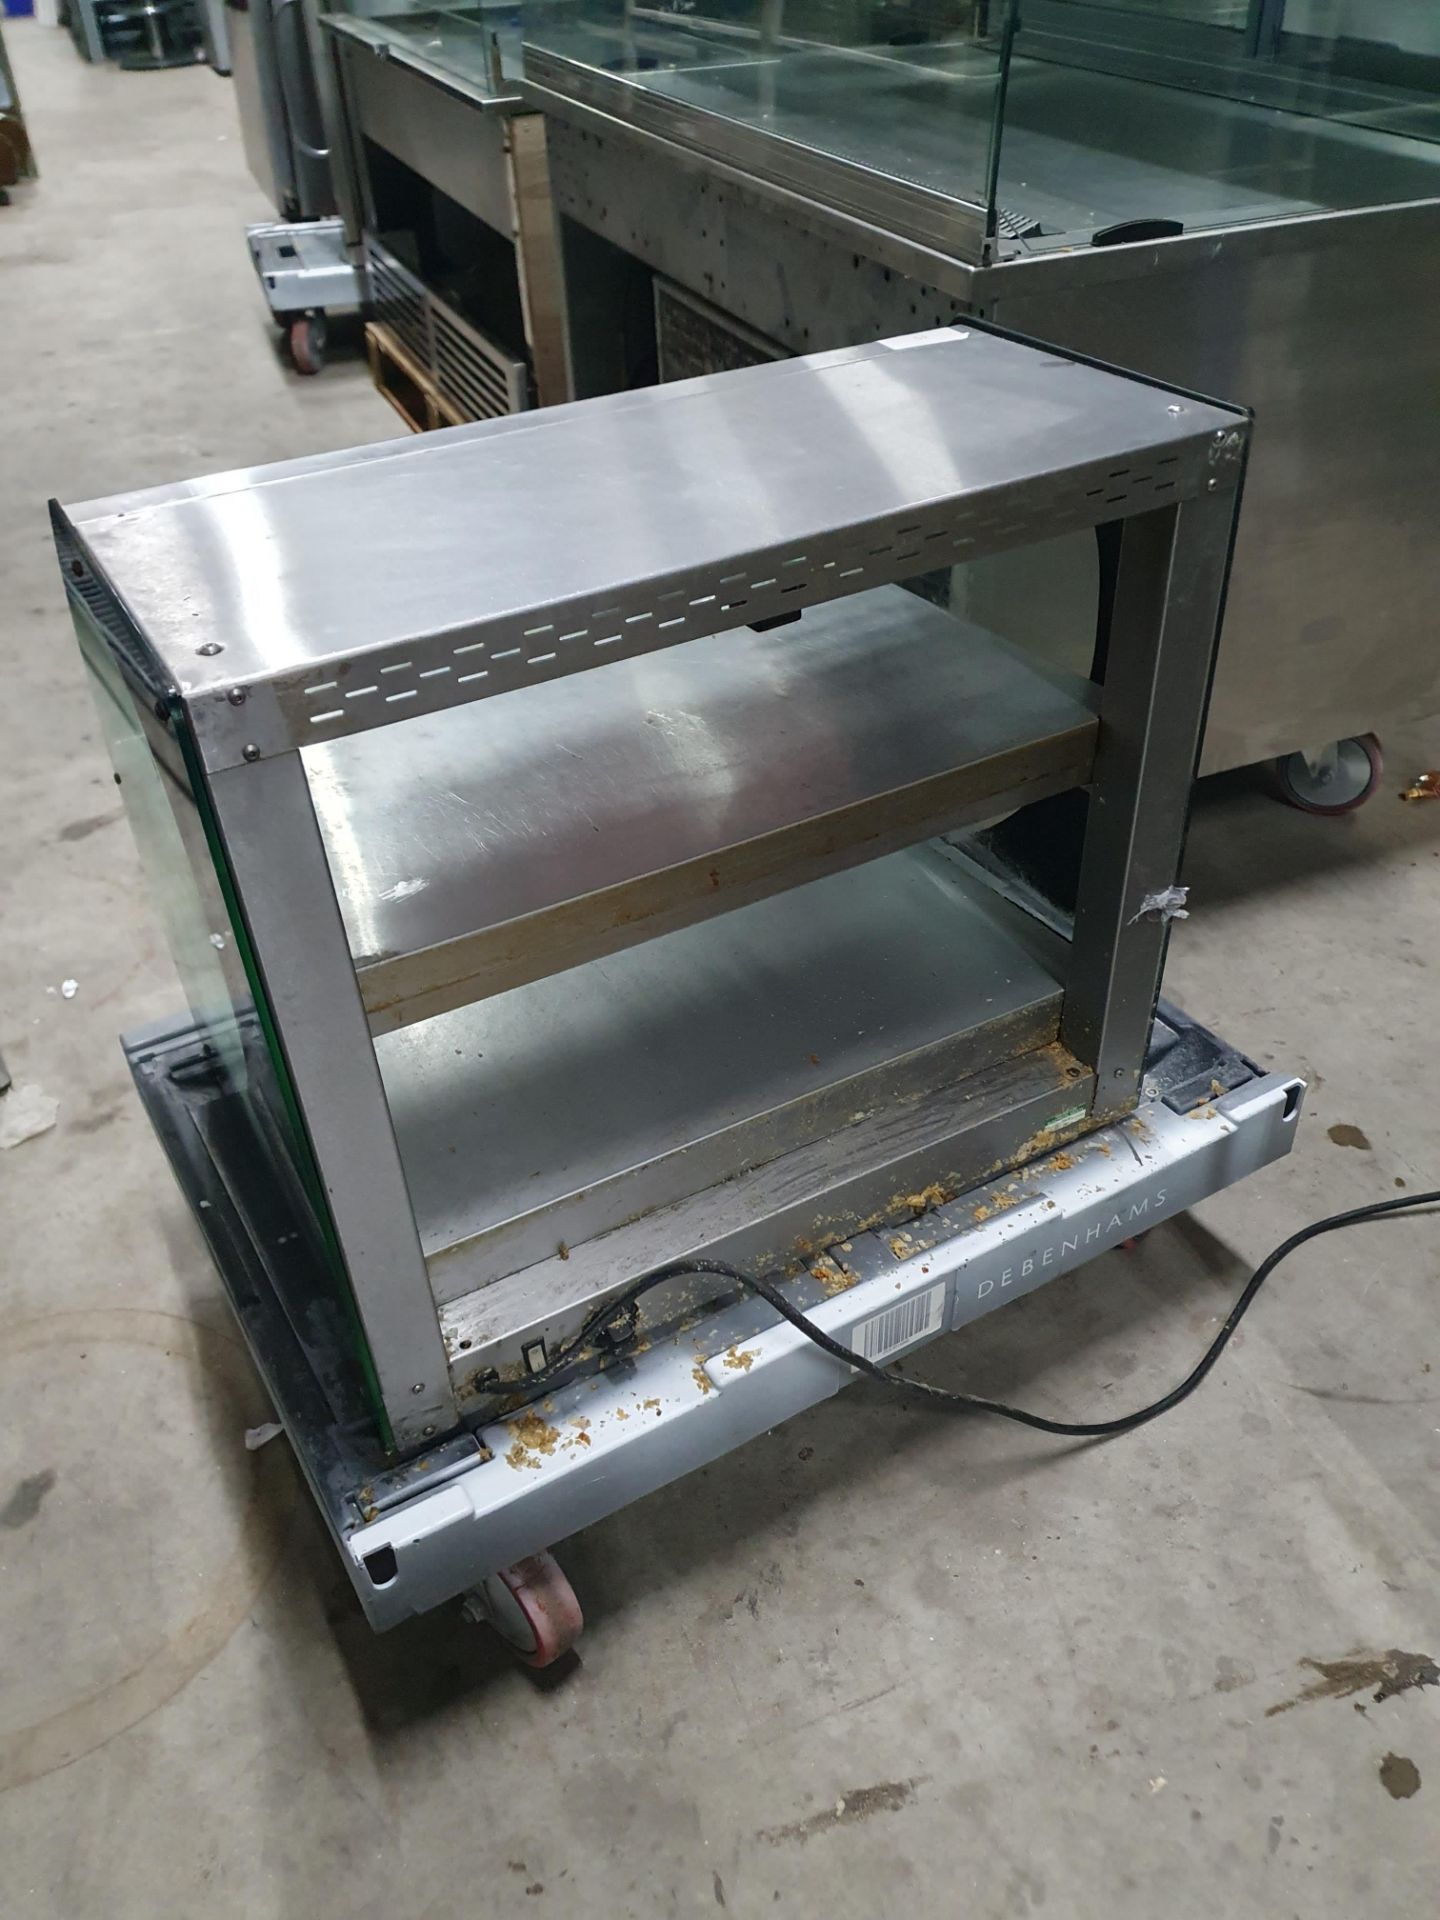 Rear Loading Countertop Heated Display Unit - Image 2 of 2